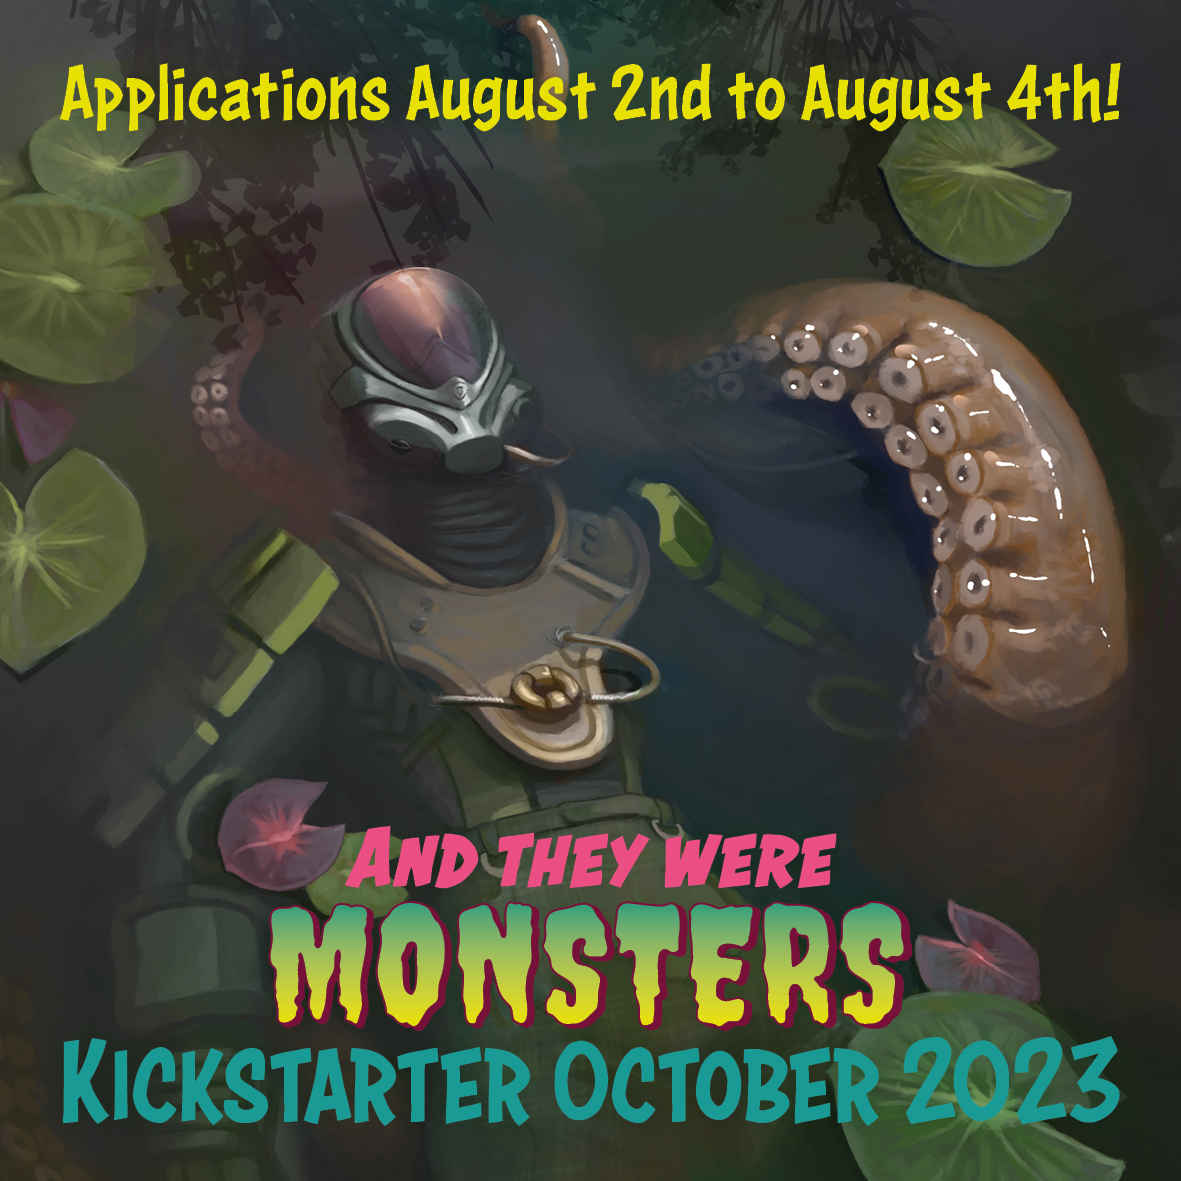 ARTISTS WANTED! We’re making an art book all about MONSTER LOVERS this fall - we’re going for campy, gay, old school movie posters and pulp fiction covers. APPLICATIONS OPEN AUGUST 2-4, NOON EASTERN TO NOON!